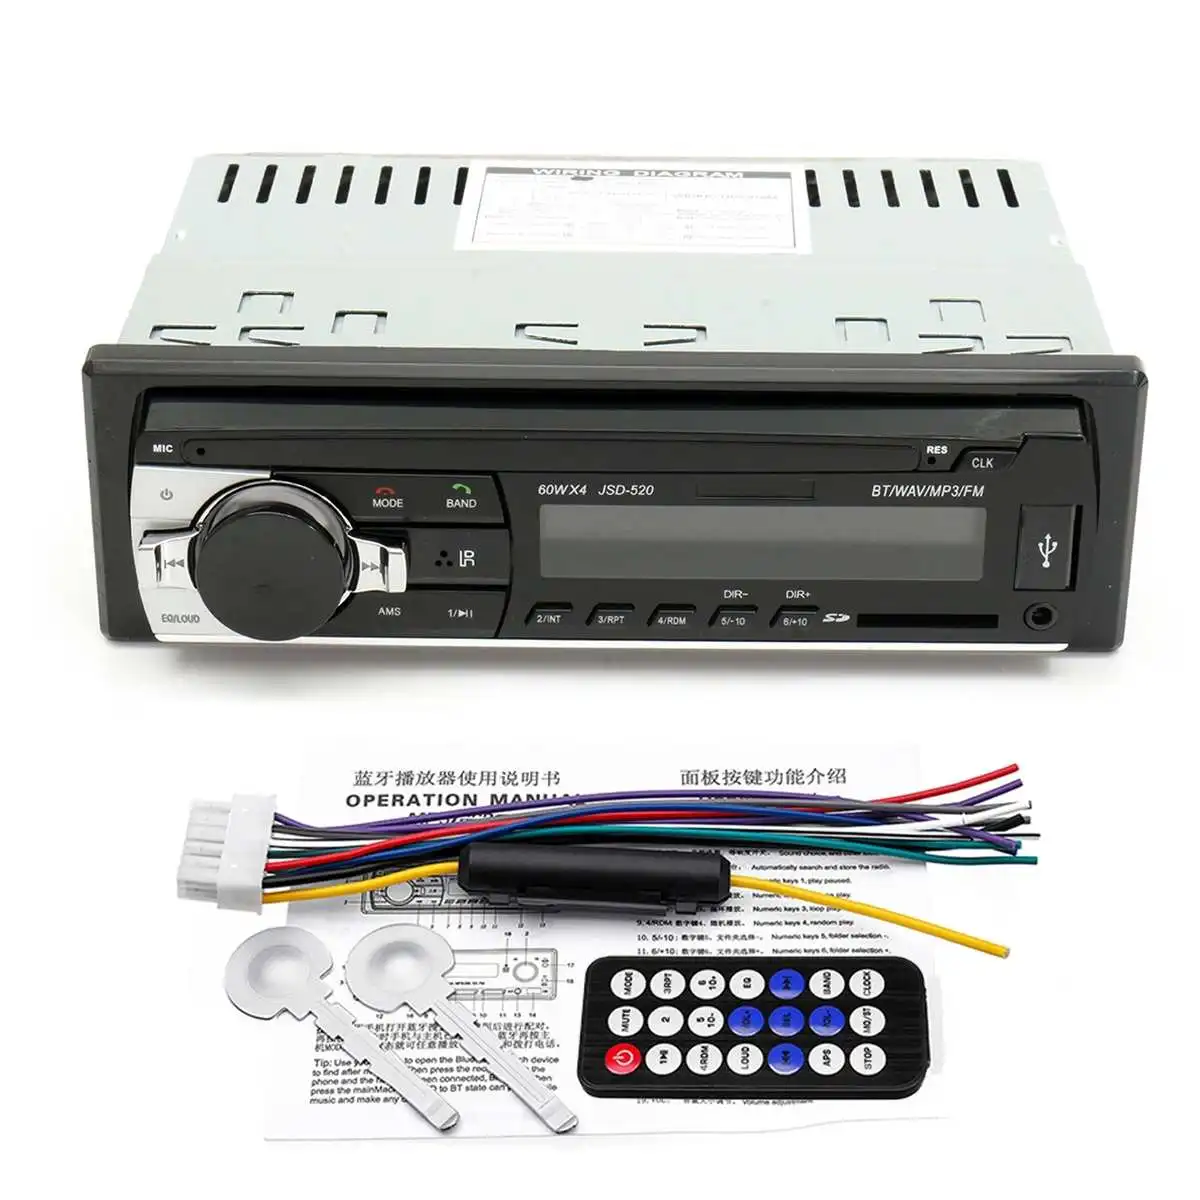 

Car 24v Stereo Audio bluetooth 1 din Car MP3 Multimedia Player USB MP3 FM Radio Player JSD-520 with Remote Control